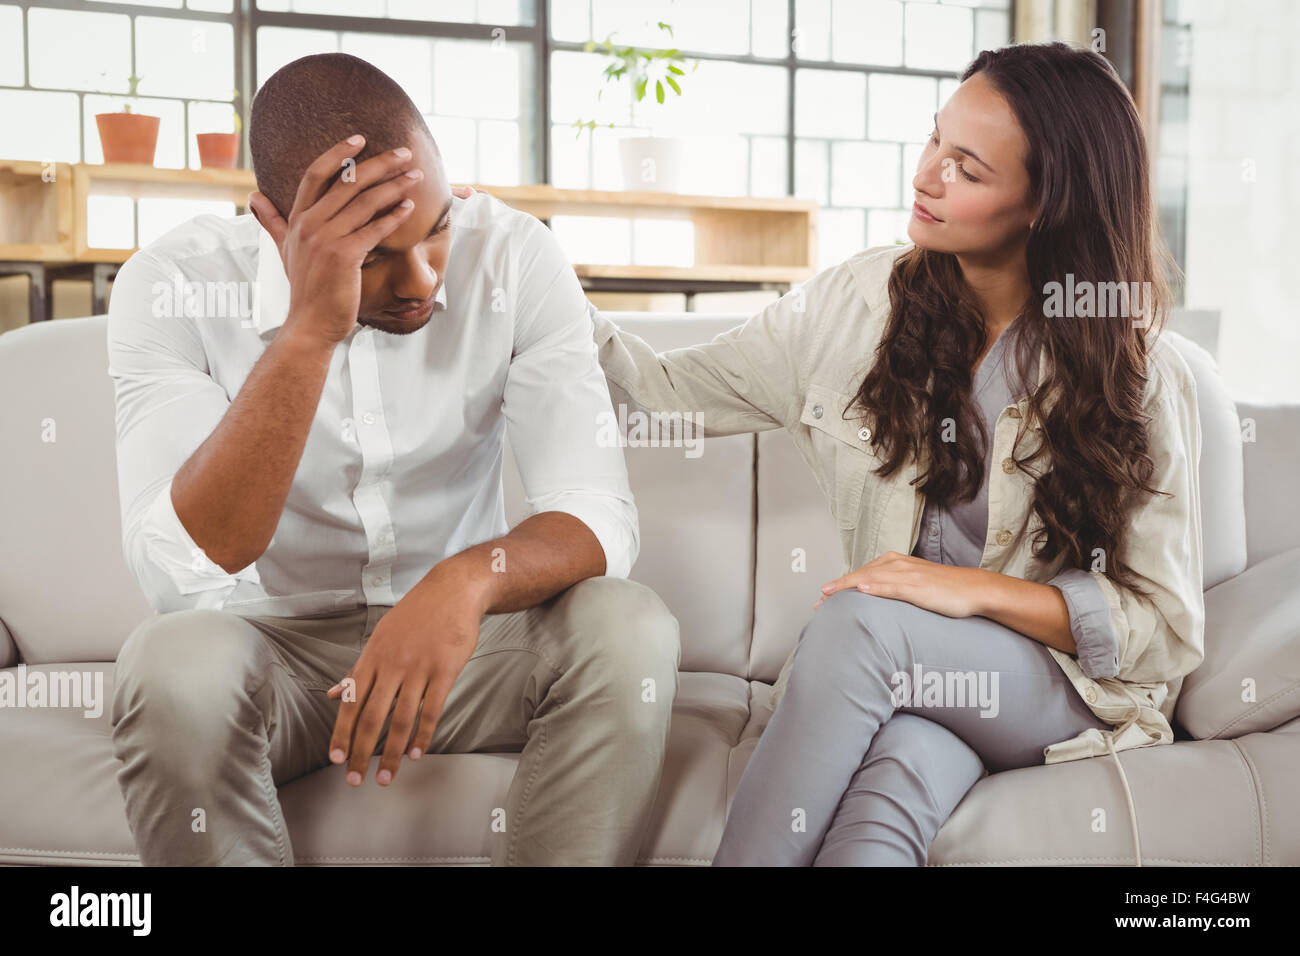 Therapist counselling depressed patient Stock Photo